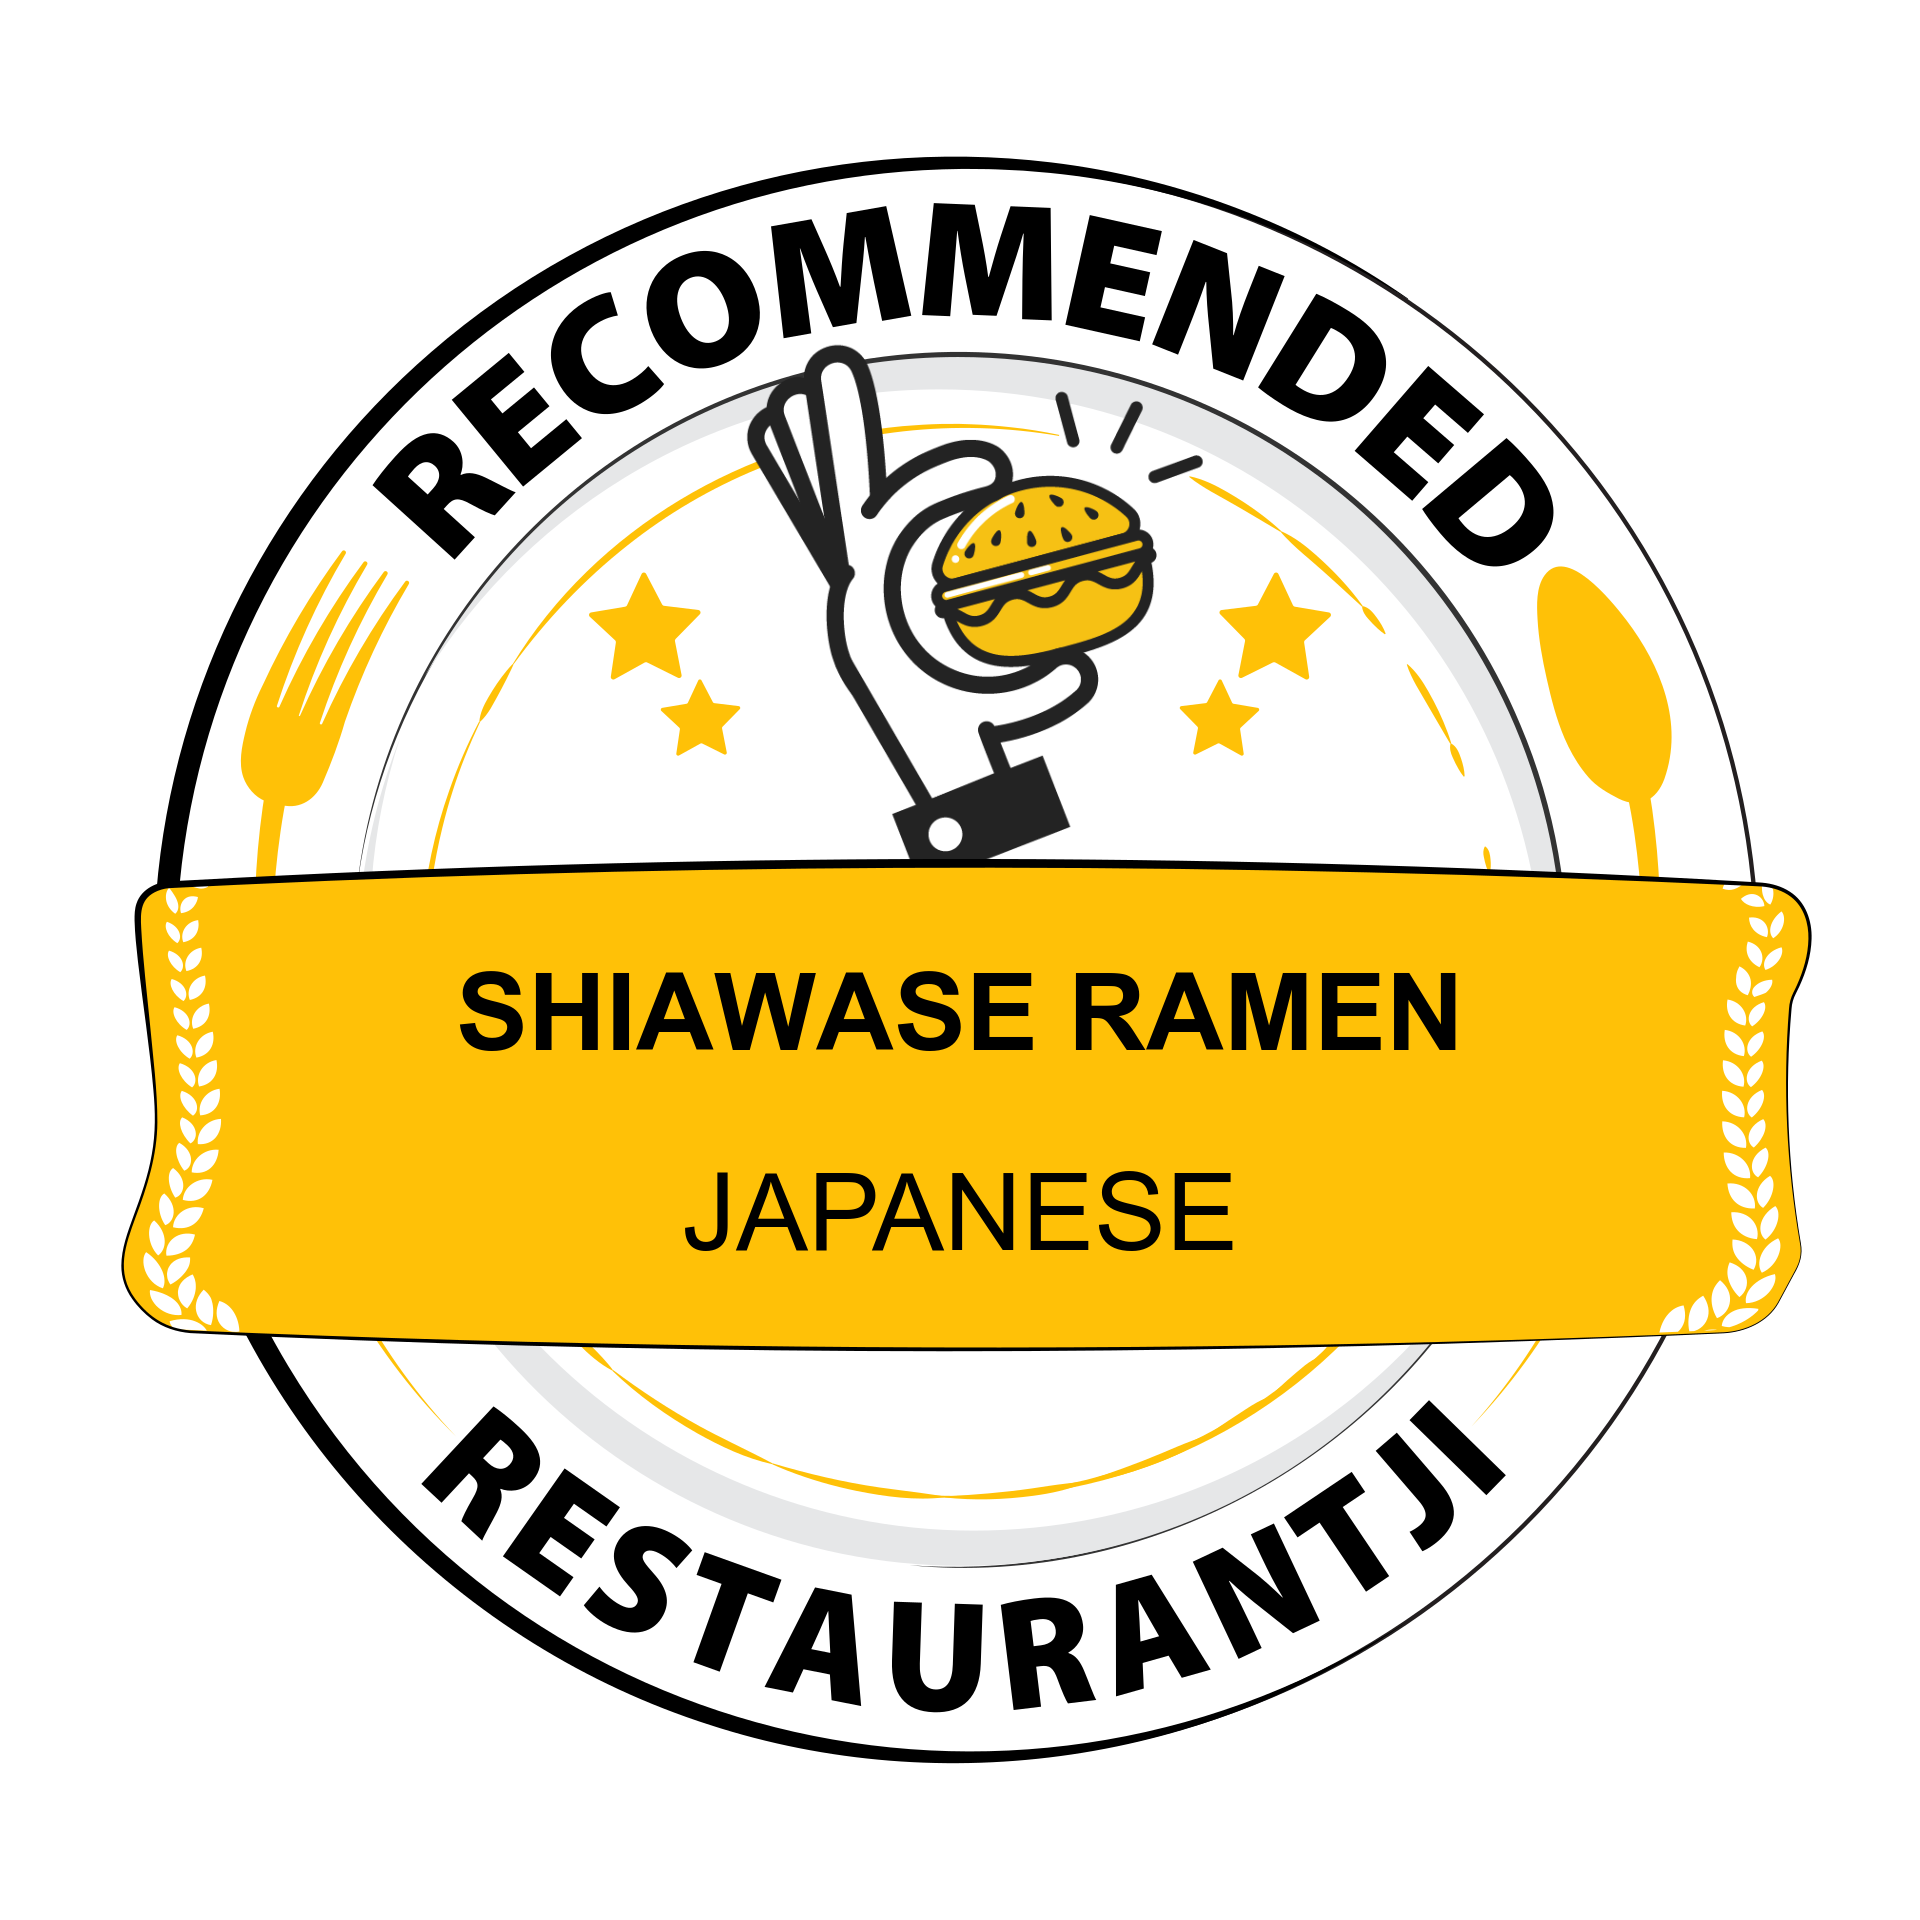 Shiawase Ramen is a go-to spot on Restaurantji - your local guide to nearby restaurants.